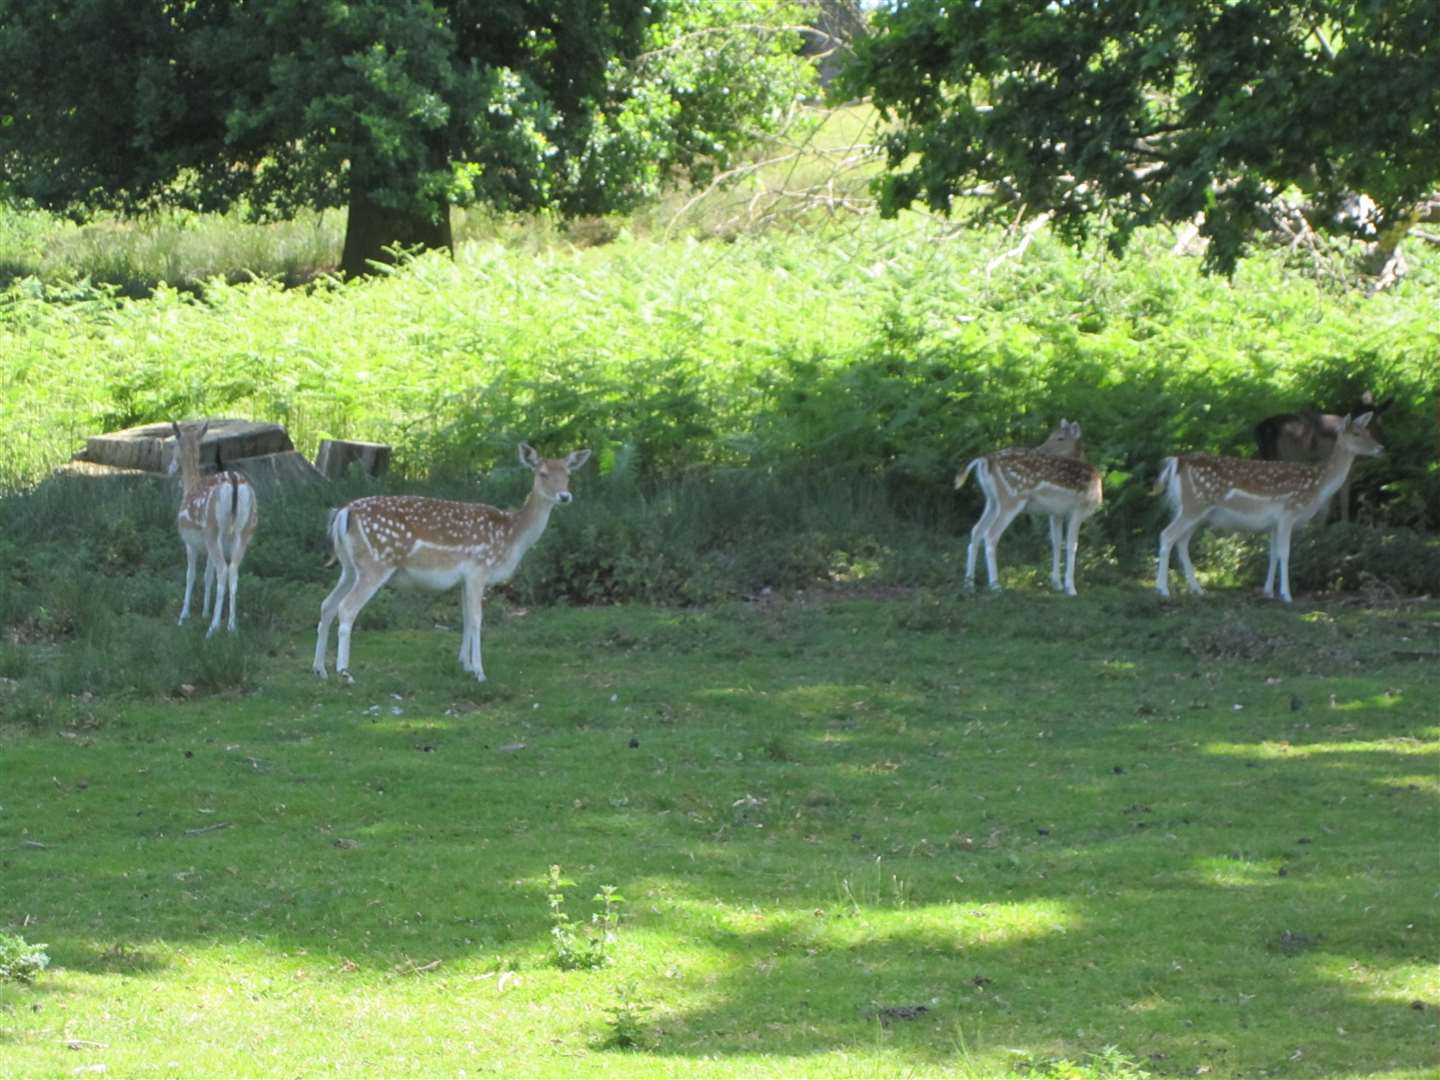 The park is famous for its deer